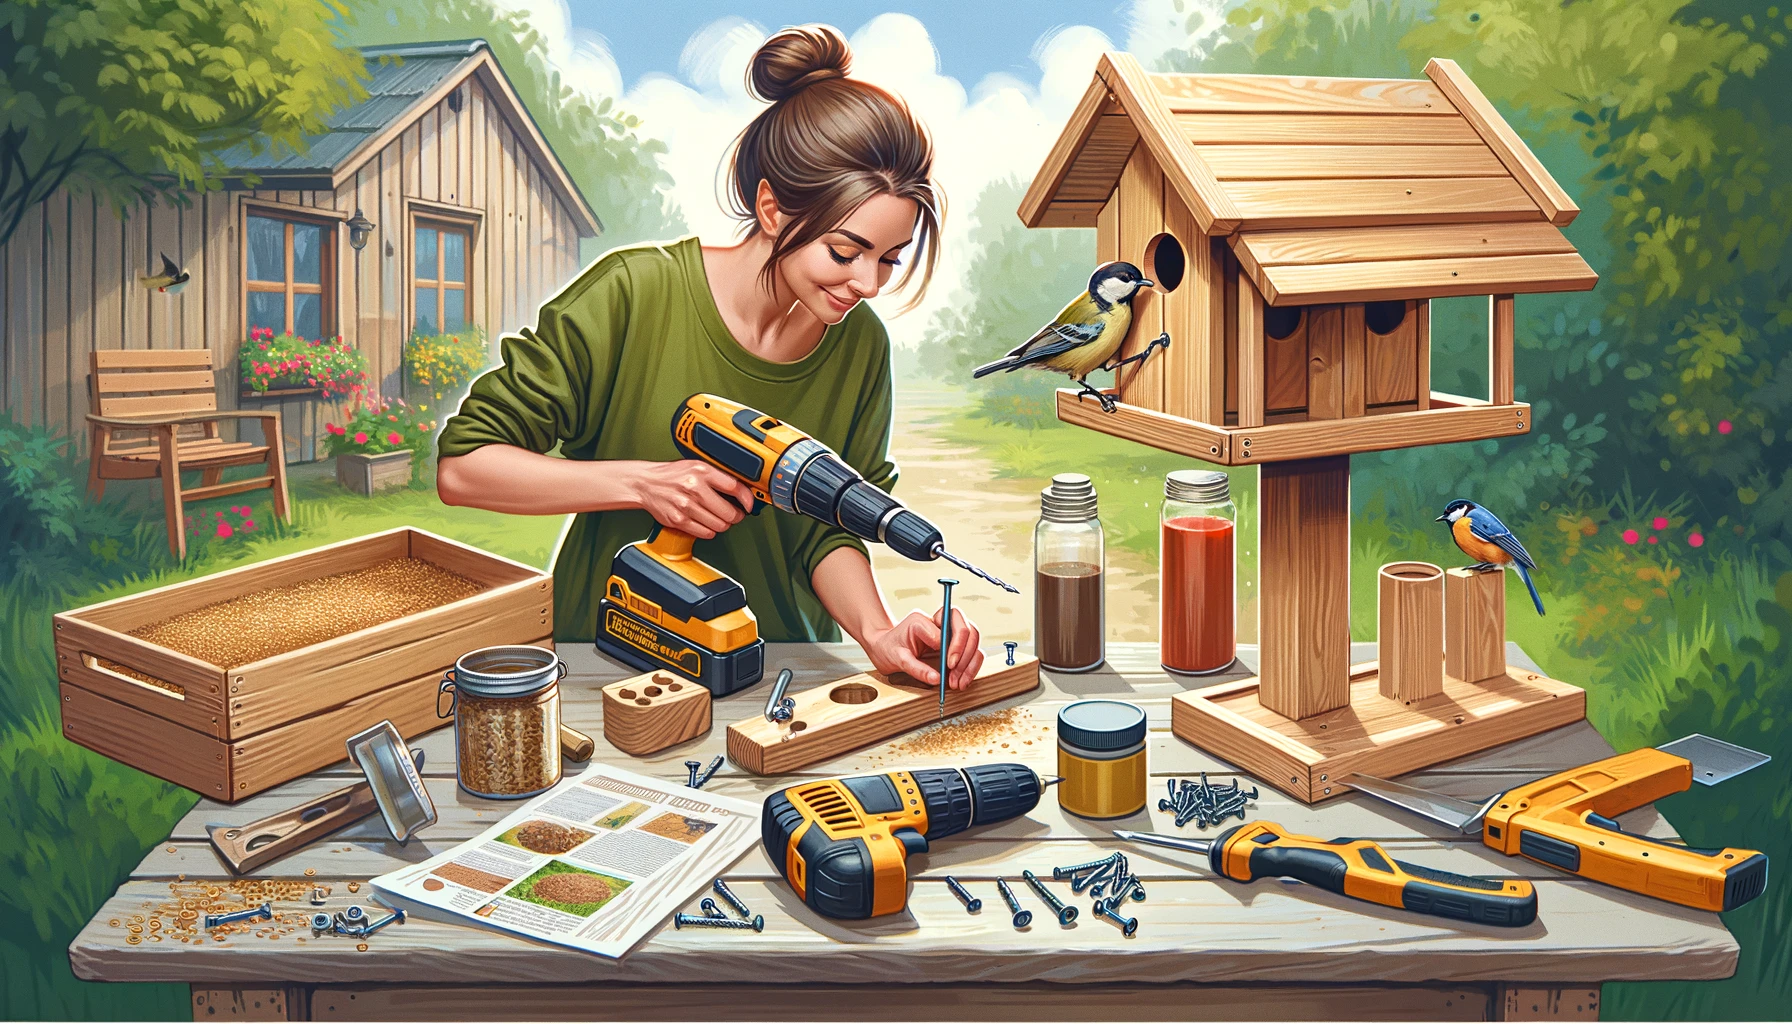 A woman constructing a bird feeder, working with materials like untreated wood, screws, a drill, saw, and bird-safe paint